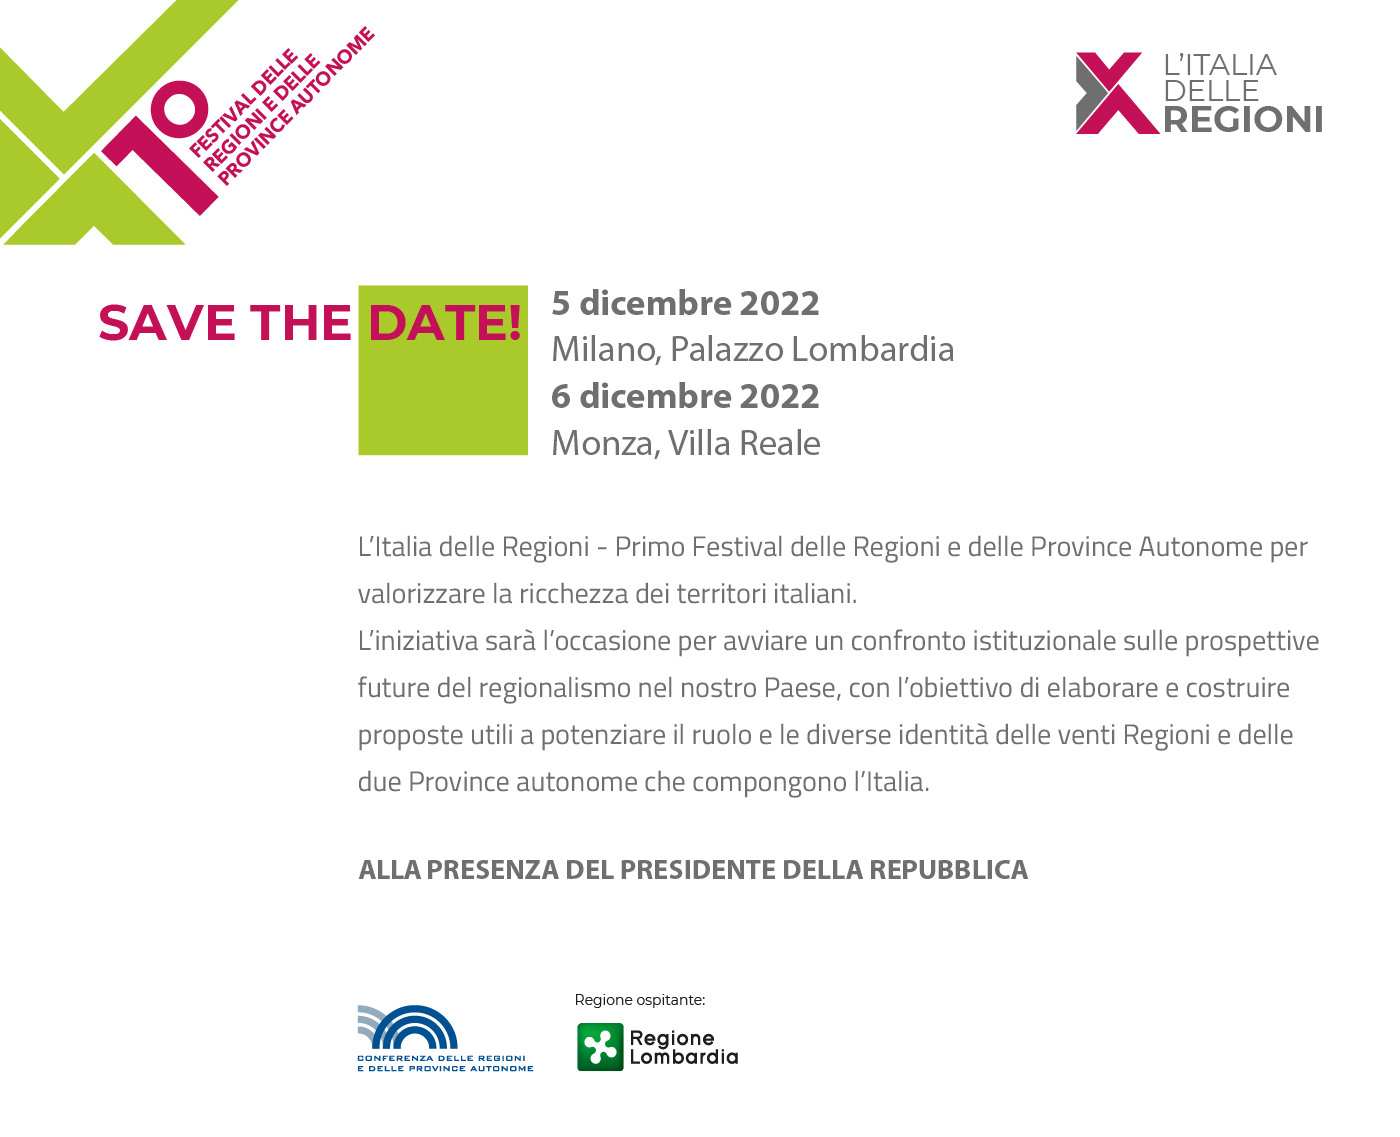 file/ELEMENTO_NEWSLETTER/24920/Save-the-date_UFFICIALE_festival_regioni_5_6_12_22_NL.png